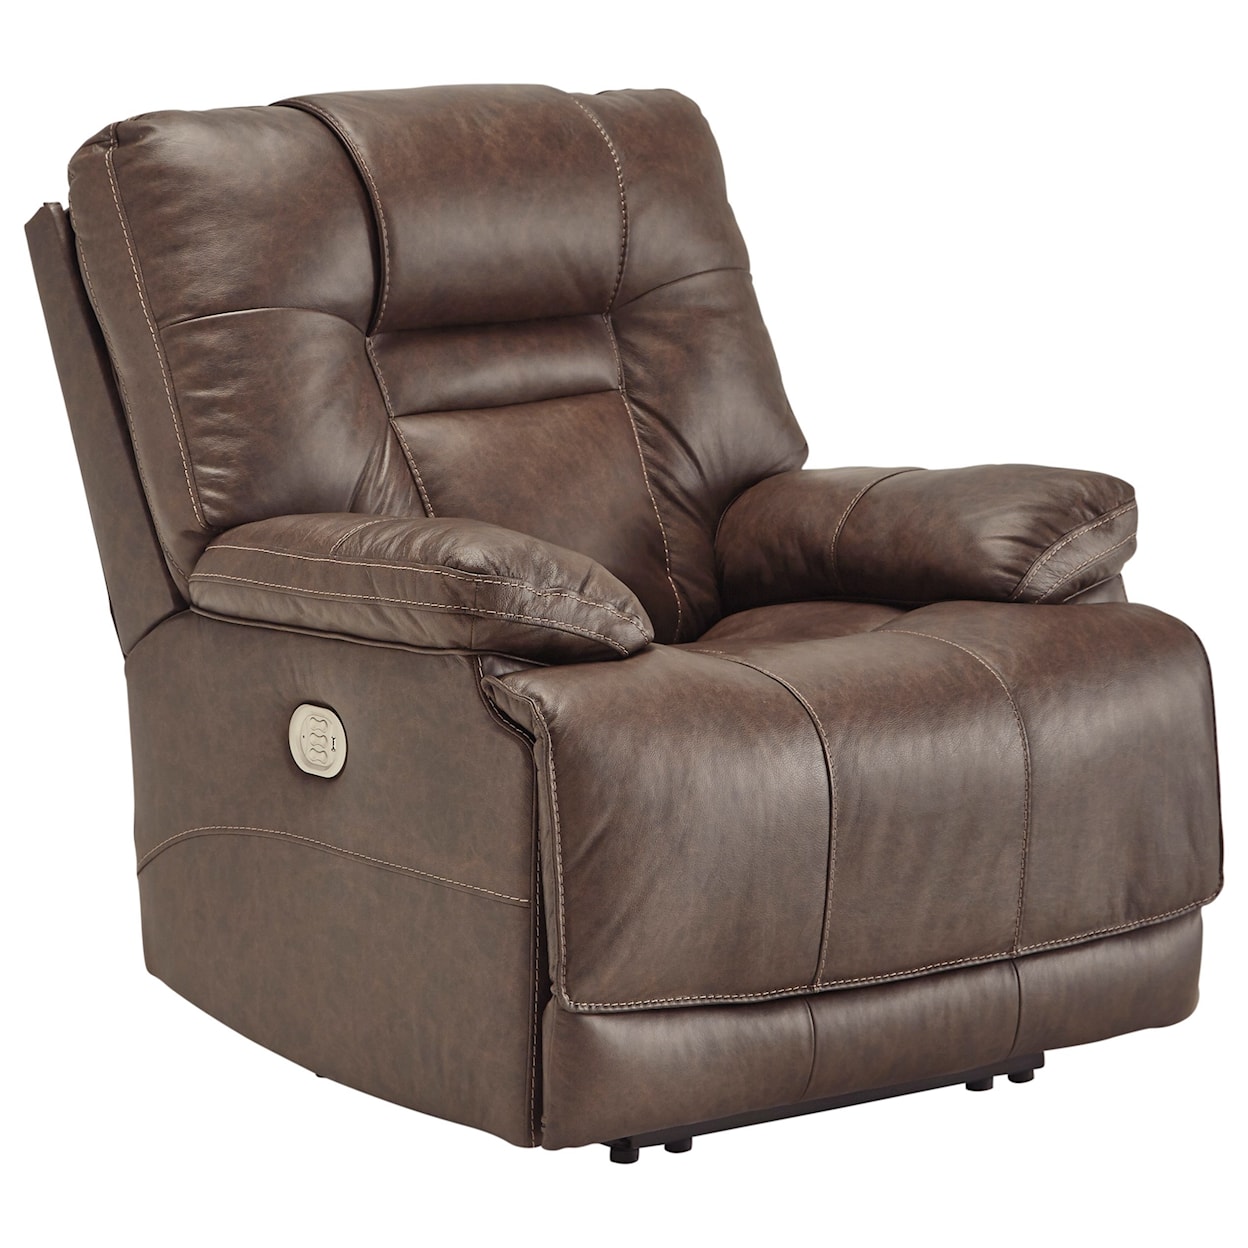 Signature Design by Ashley Wurstrow Power Recliner